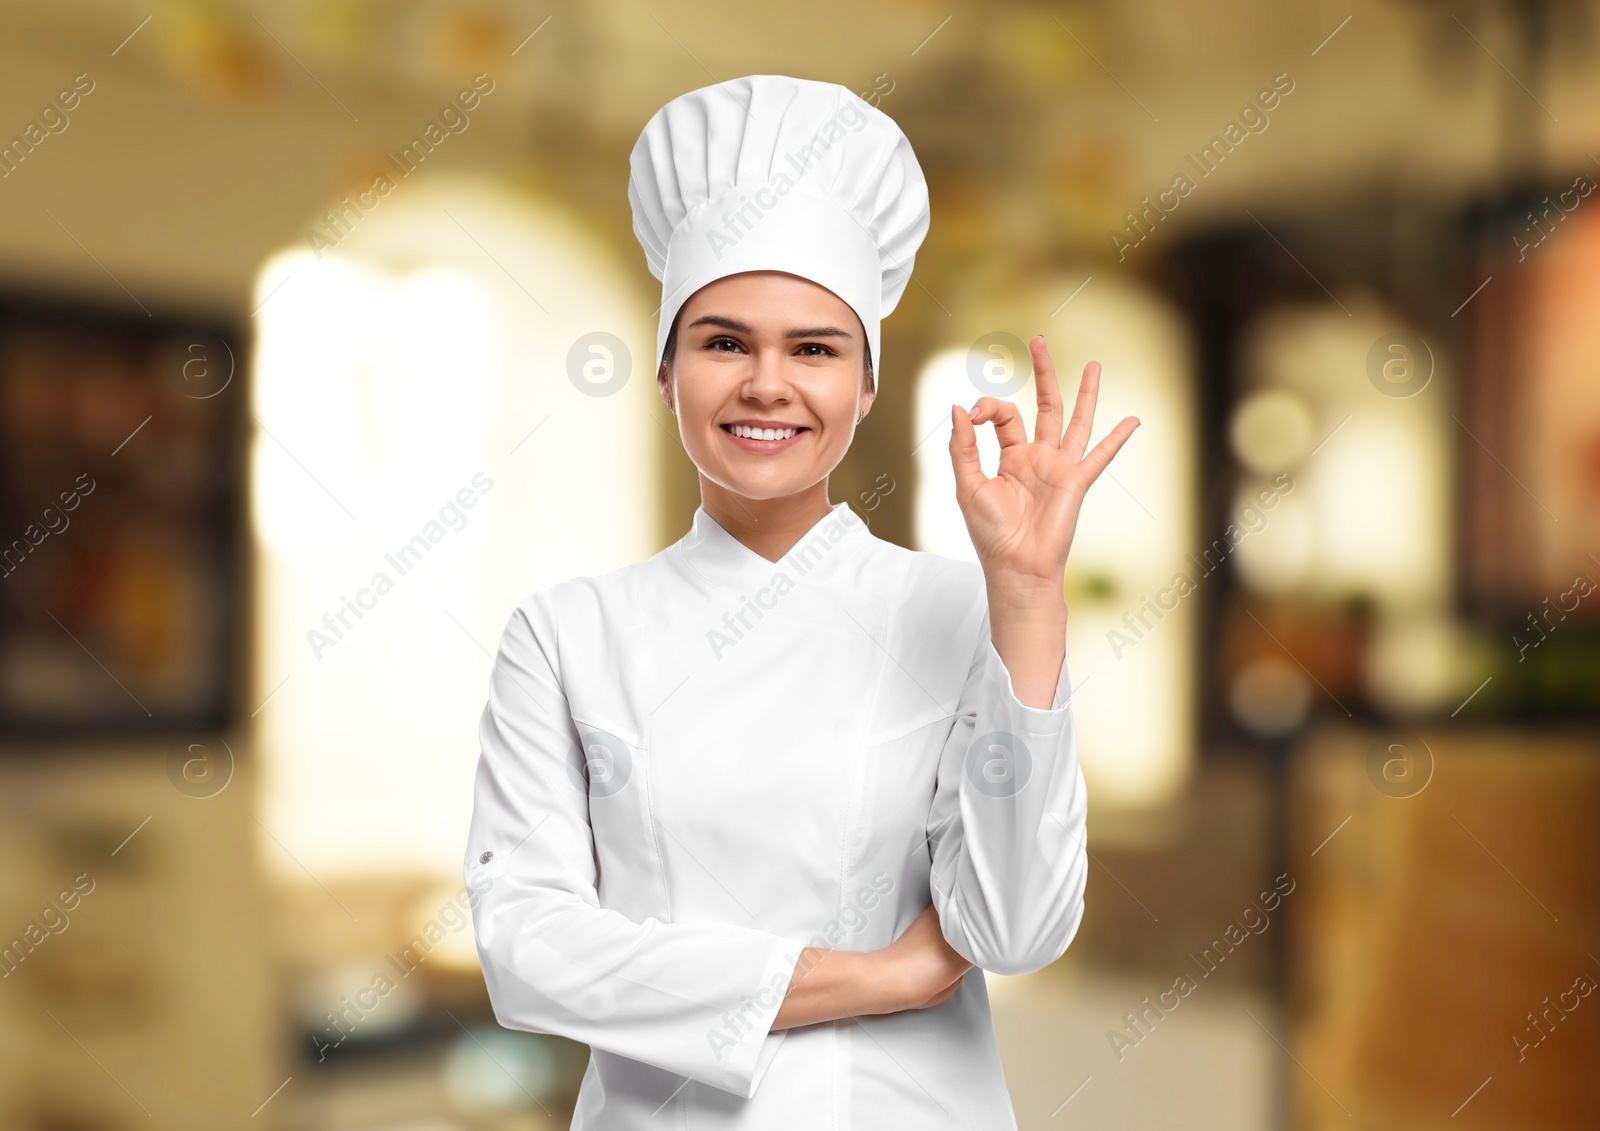 Image of Smiling chef showing ok gesture in restaurant